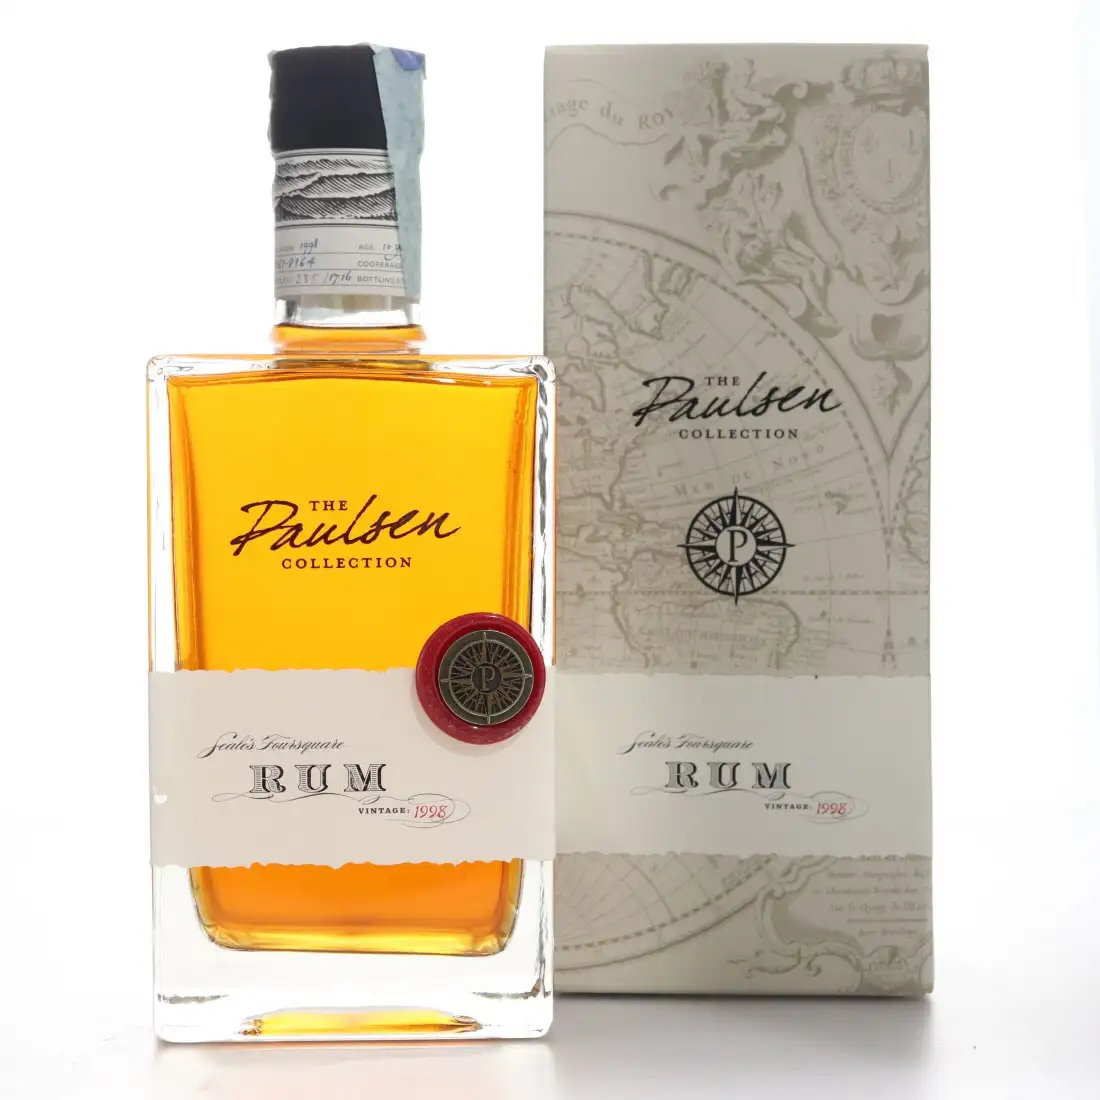 Image of the front of the bottle of the rum The Paulsen Collection